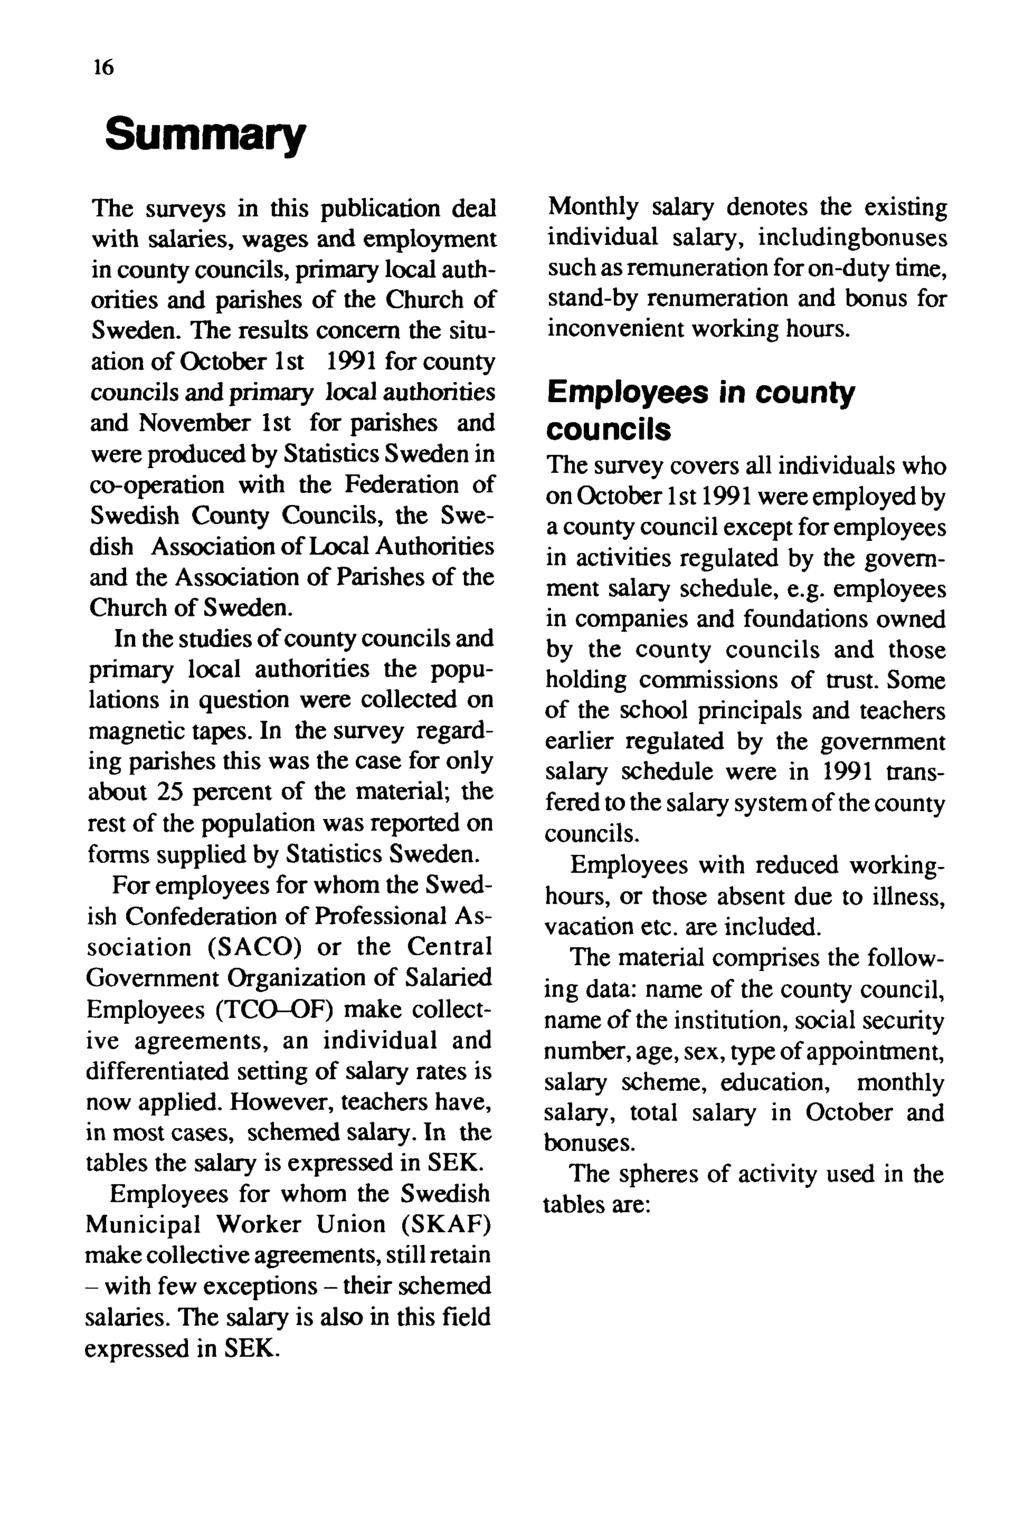 16 Summary The surveys in this publication deal with salaries, wages and employment in county councils, primary local authorities and parishes of the Church of Sweden.